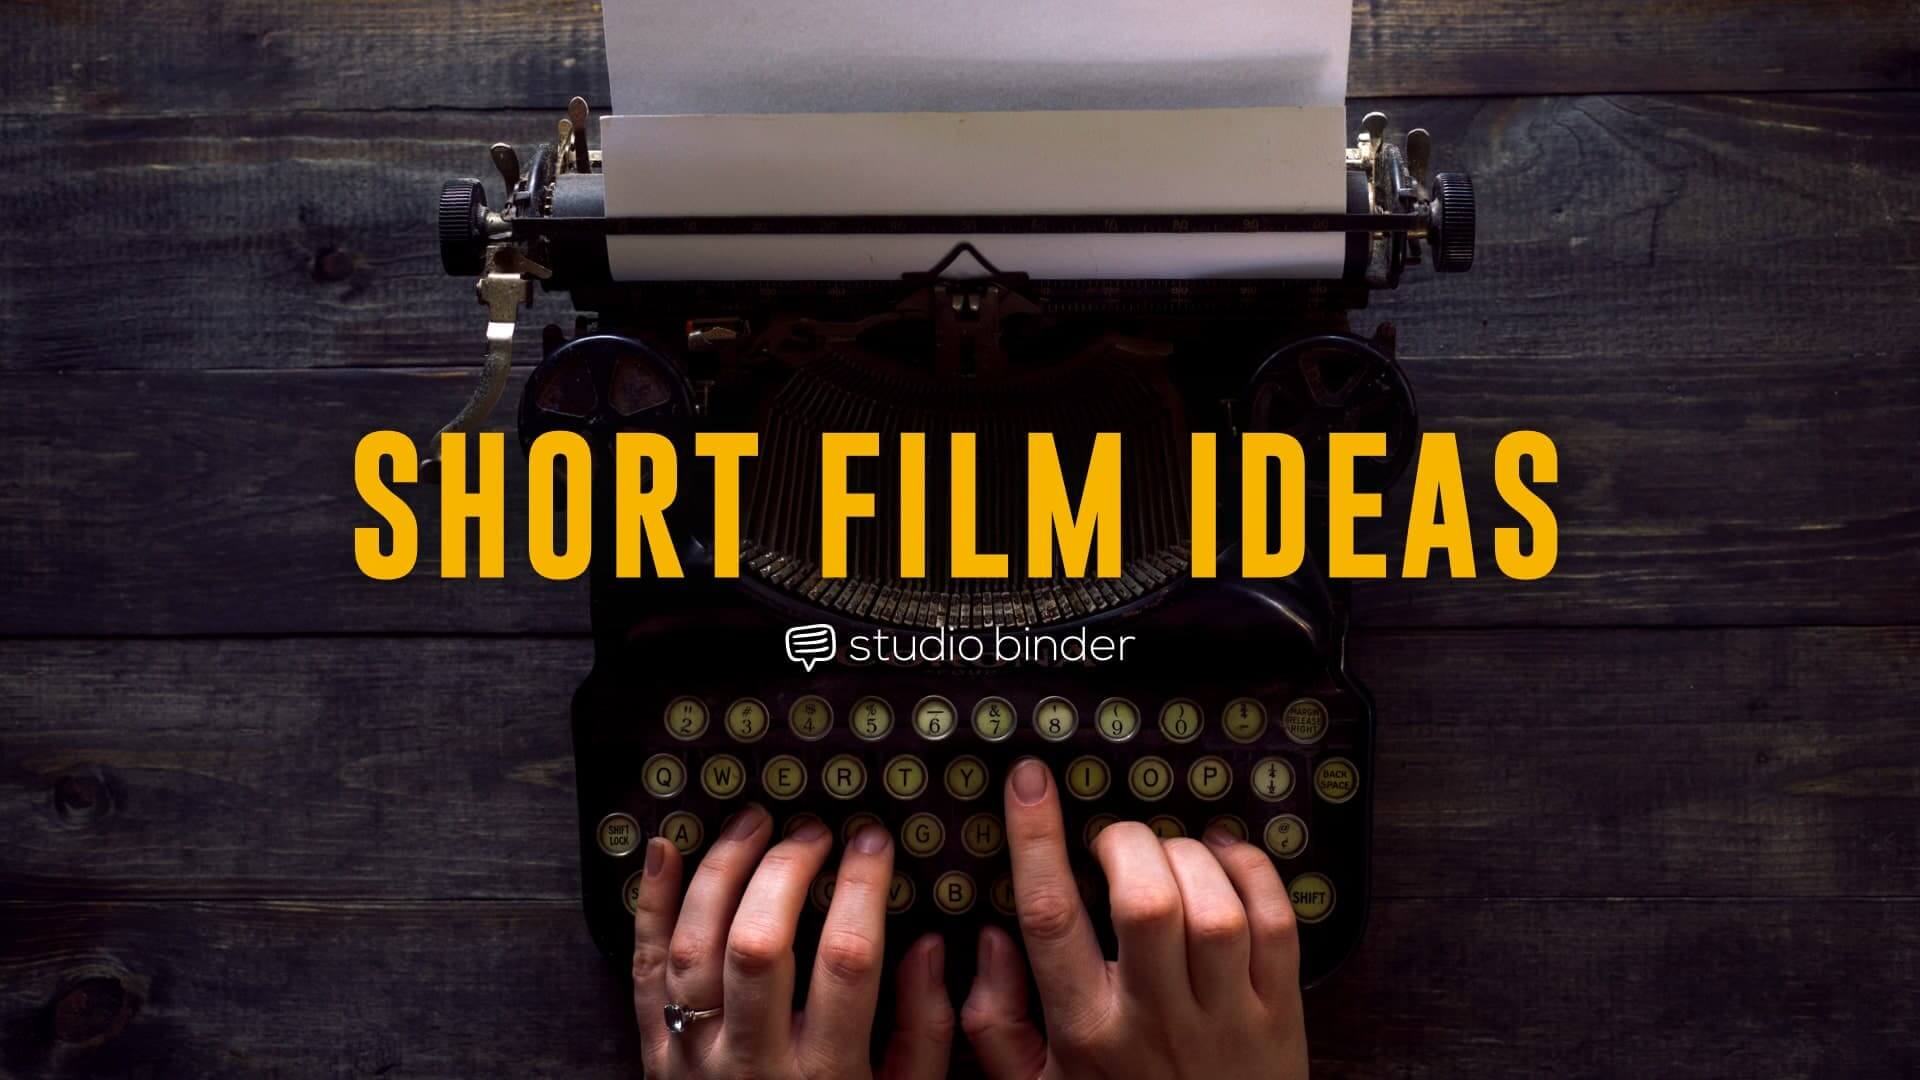 30 Ways to Brainstorm Short Film Ideas You Can Actually Produce